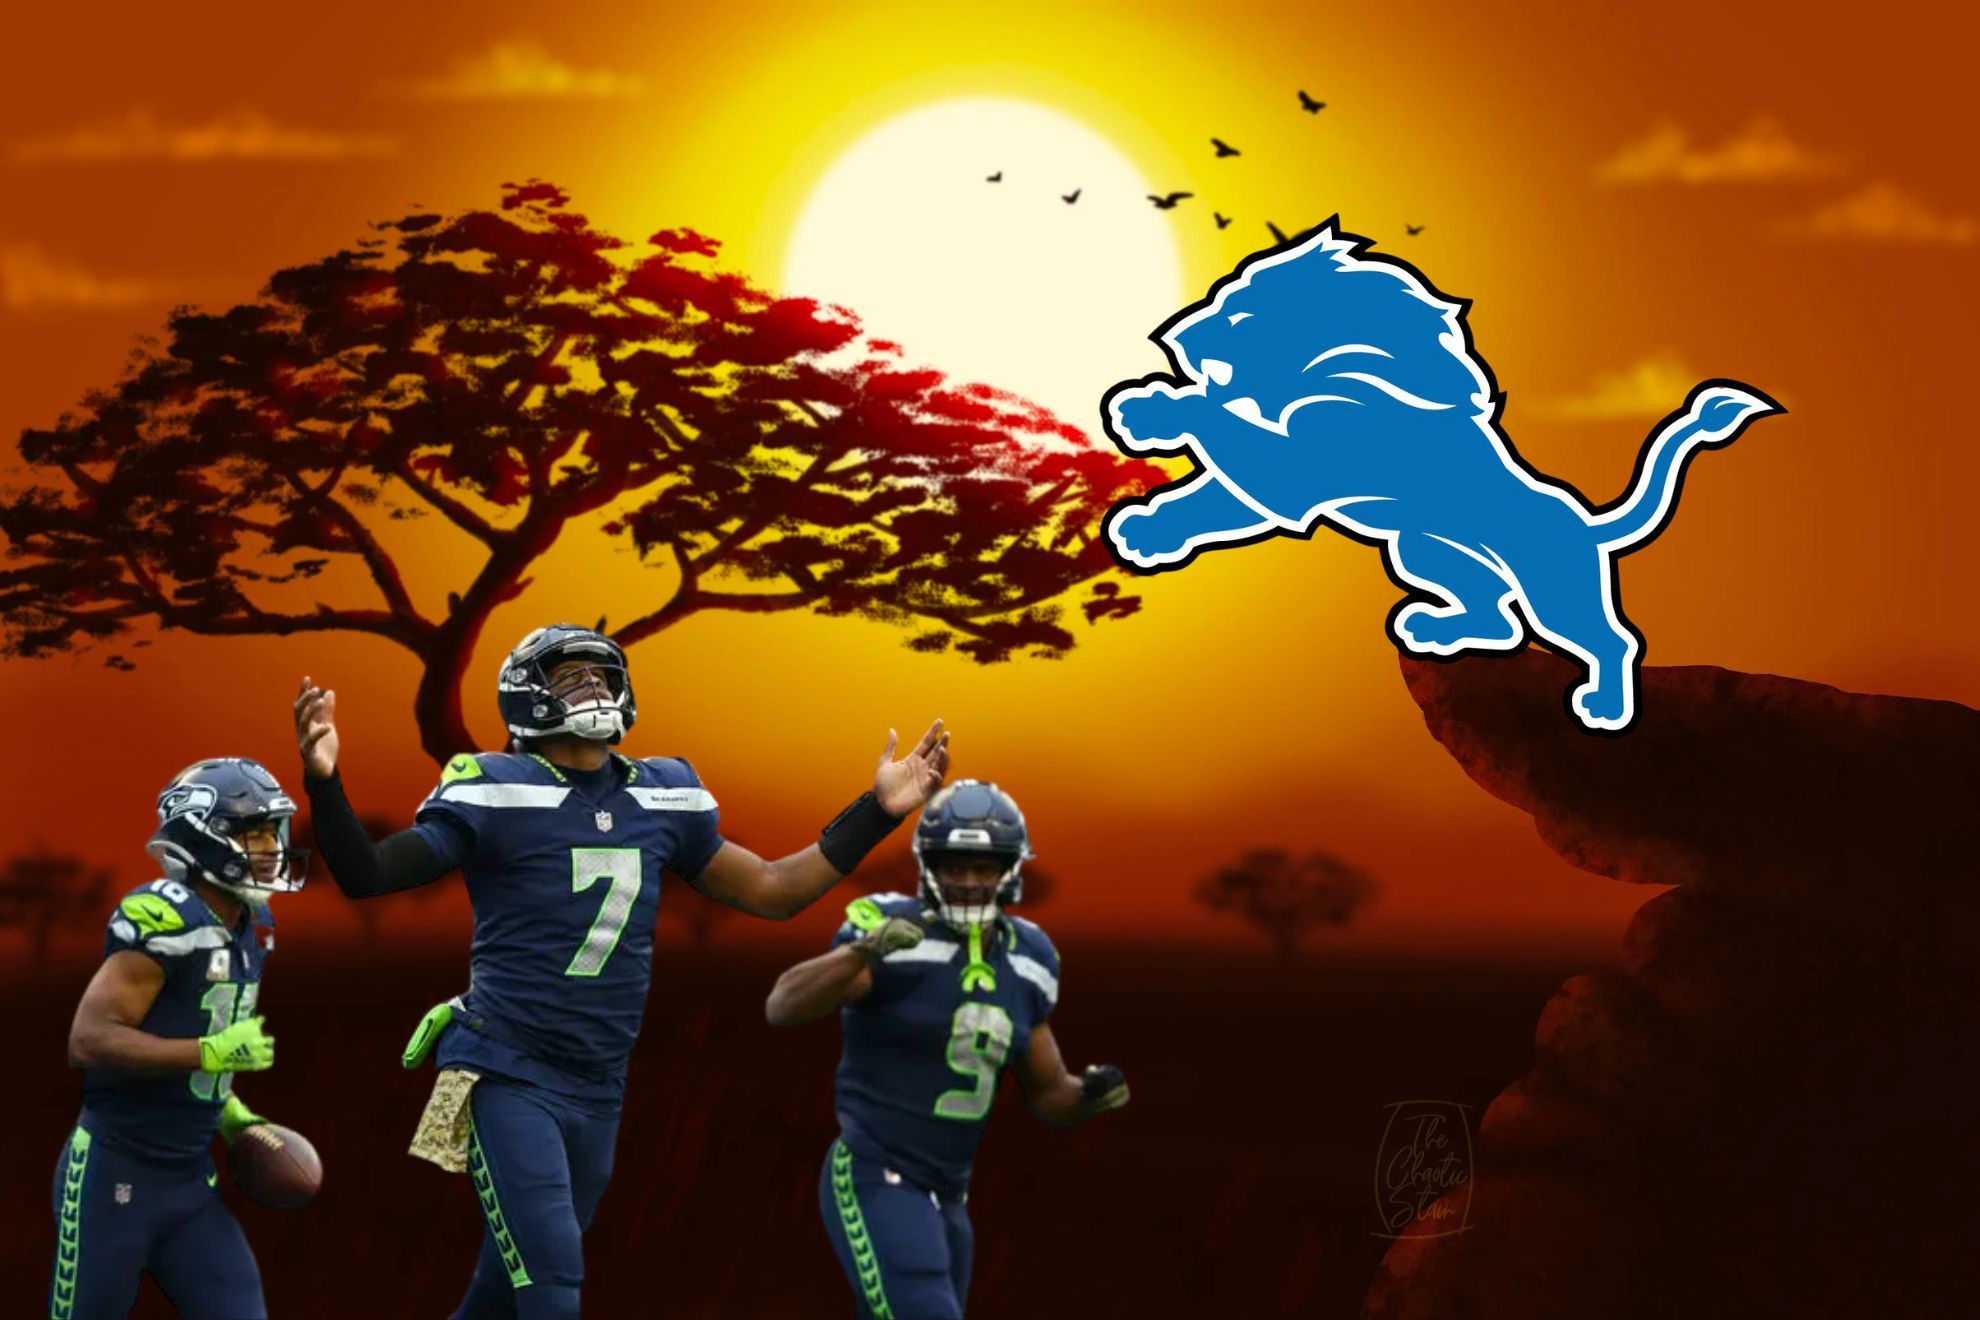 The Seahawks thanked the Detroit Lions on social media with a simple meaningful message: "Hakuna Matata".